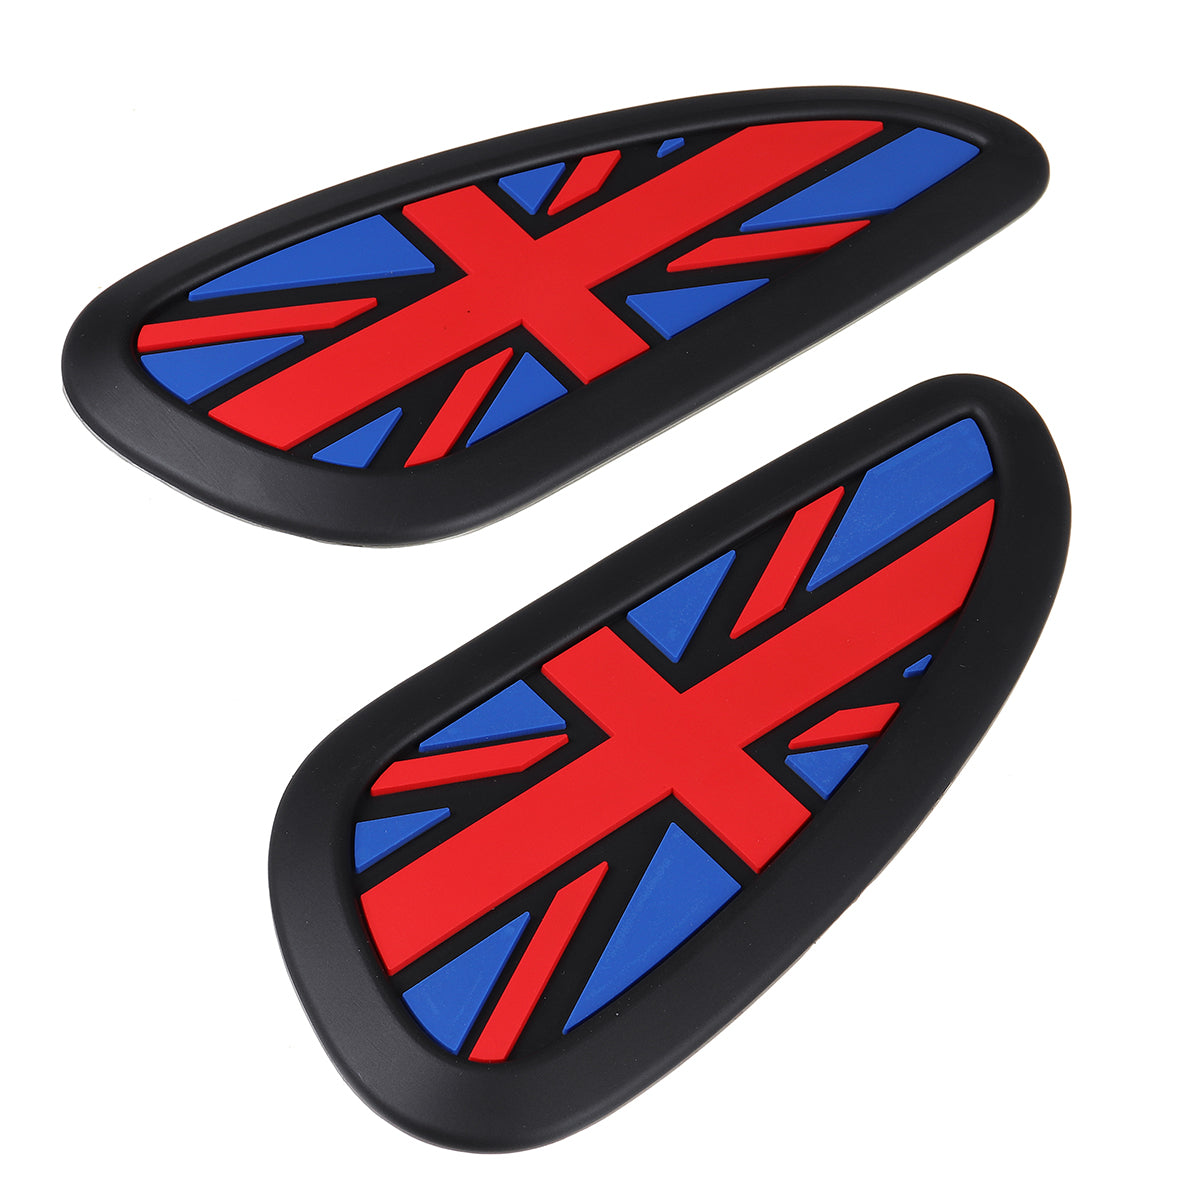 Firebrick Retro Motorcycle Cafe Racer Gas Fuel tank Rubber Sticker Tank Pad Protector